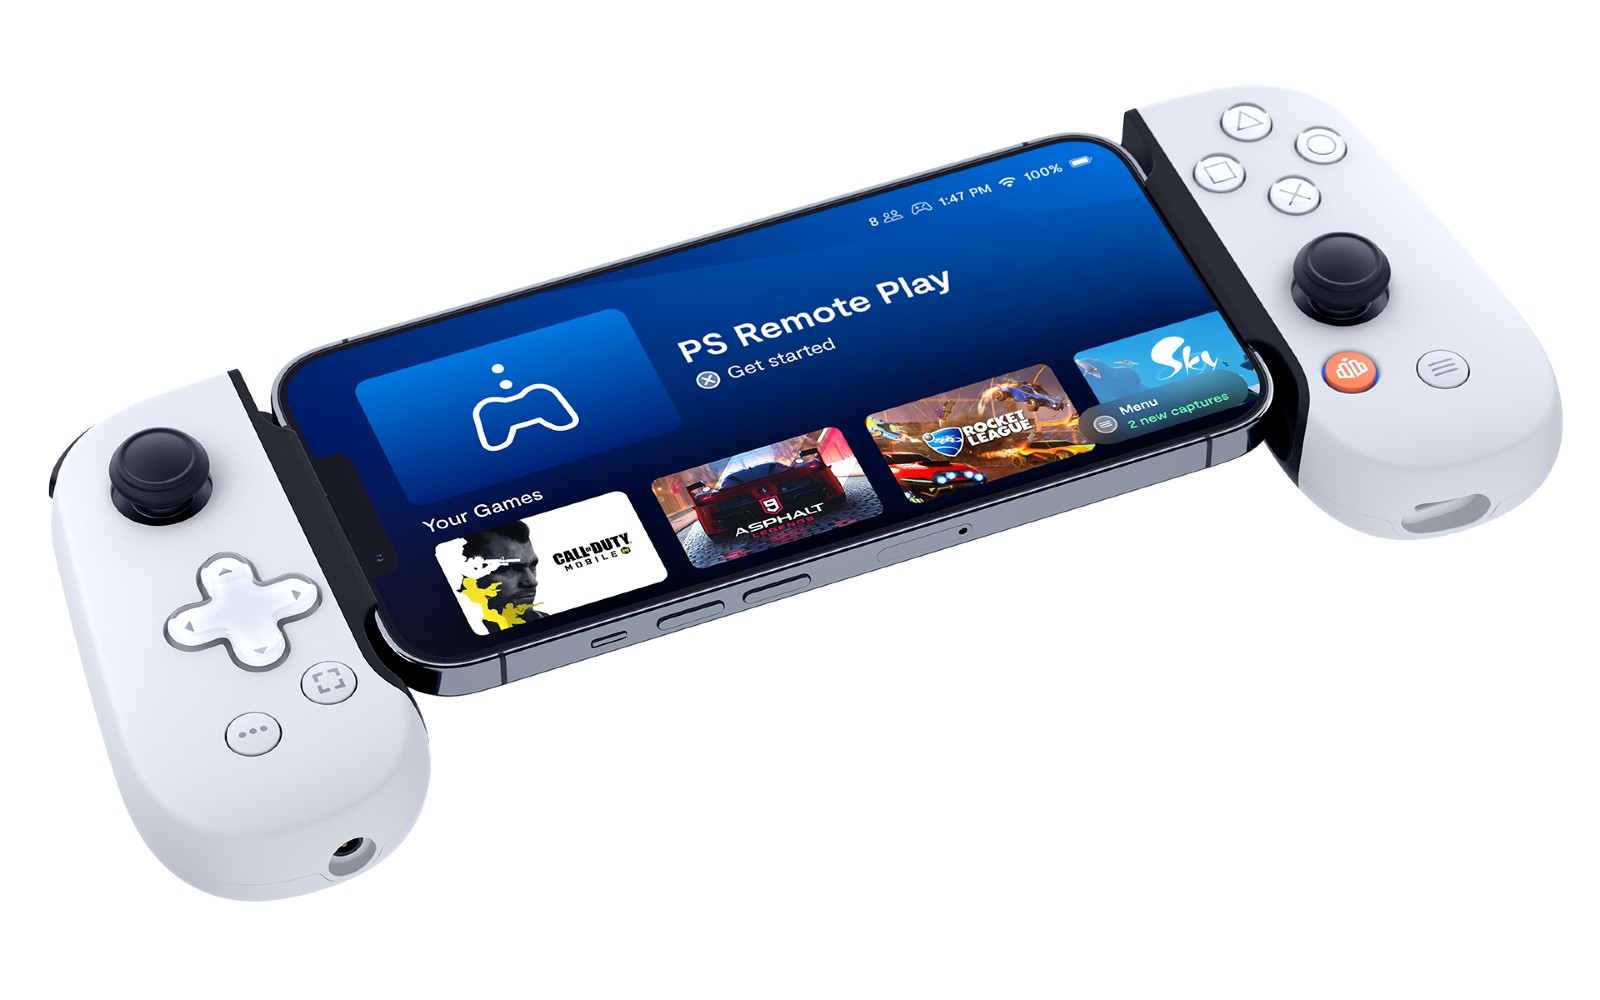 Backbone made a PlayStation version of its excellent iPhone controller